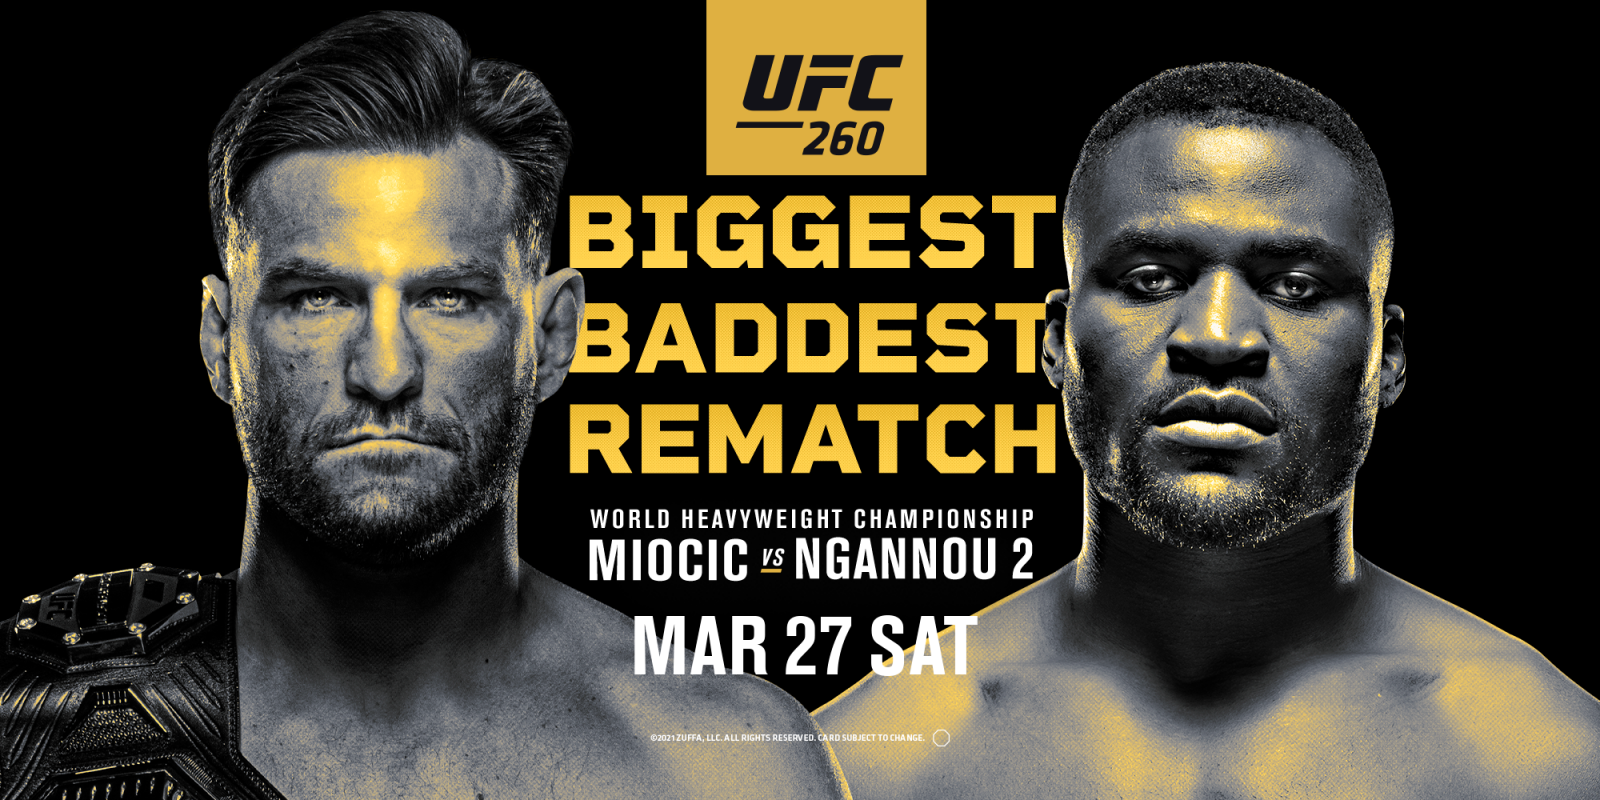 UFC 260 Live Stream: Time, How to Watch Miocic vs Ngannou 2 Online, Fight Card